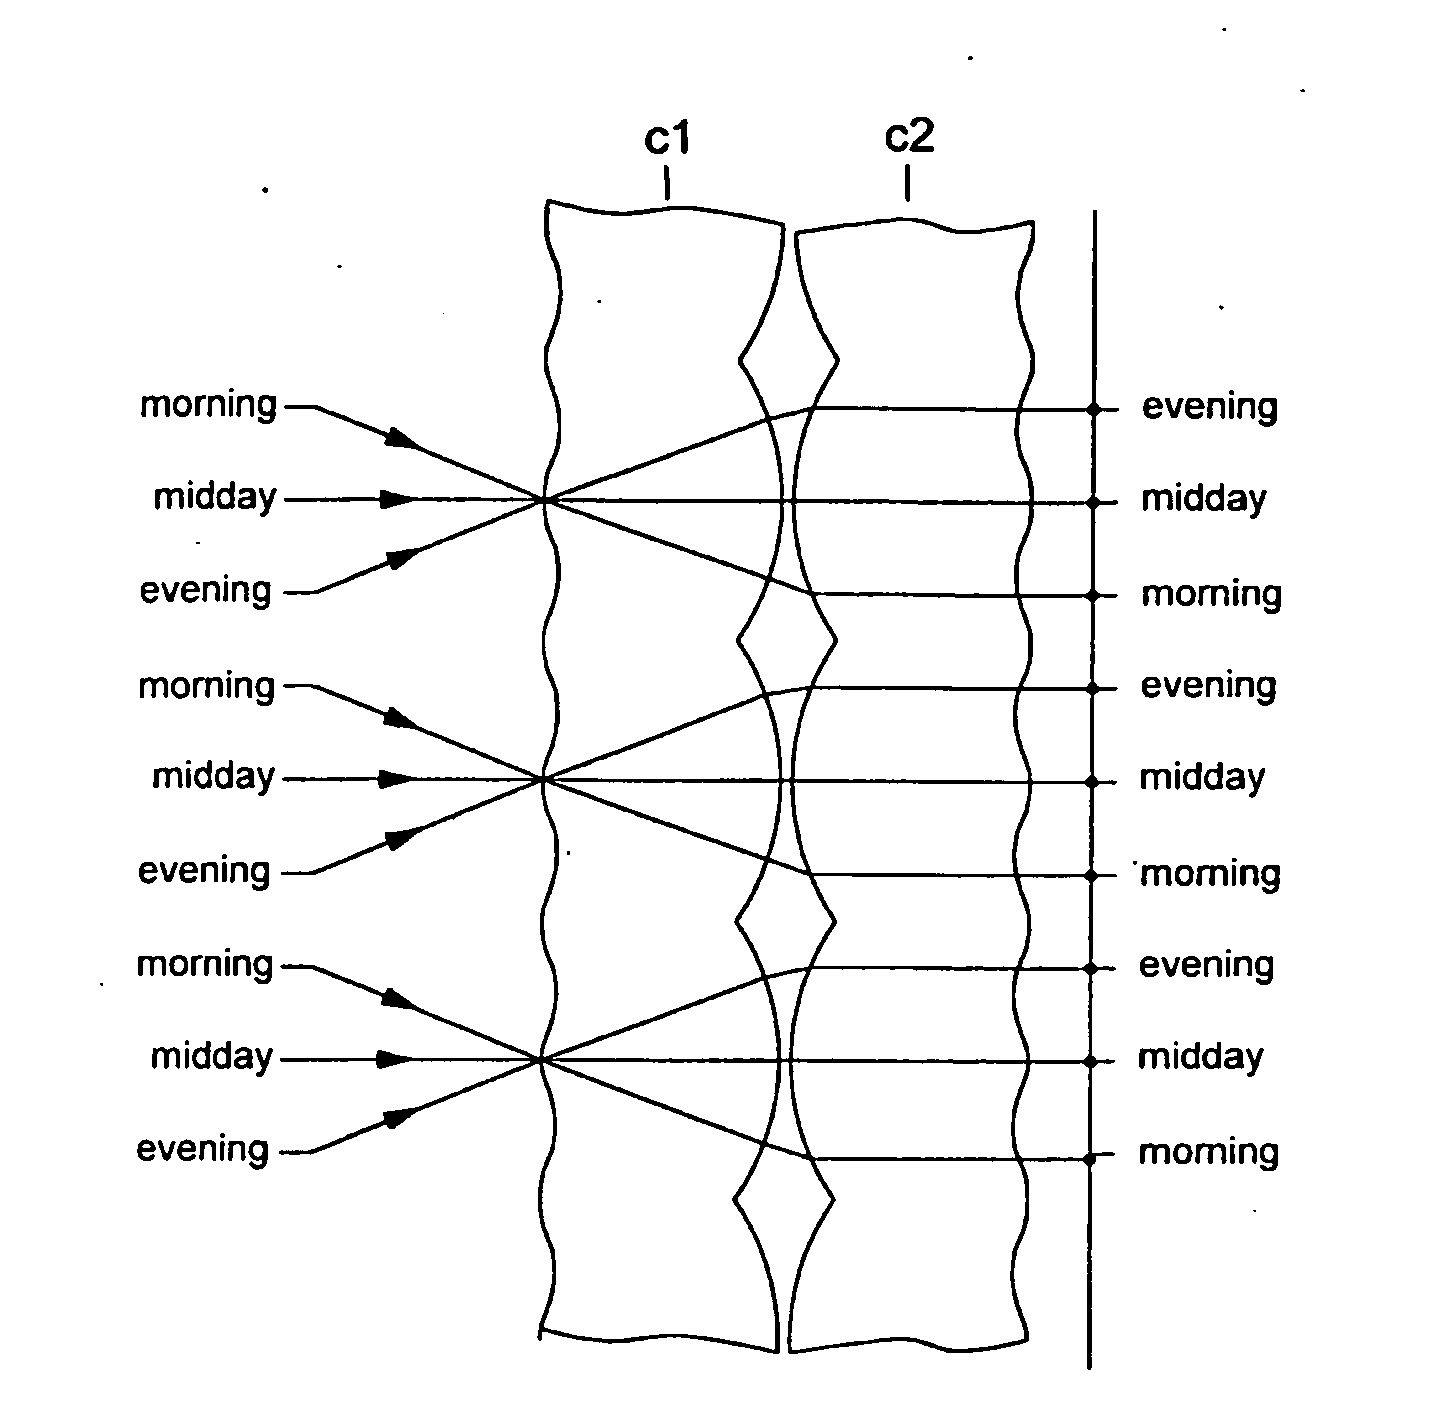 Photovoltaic Flat Panel With Enhanced Acceptance Angle Comprising Micro-Lens Array In Laminating Film